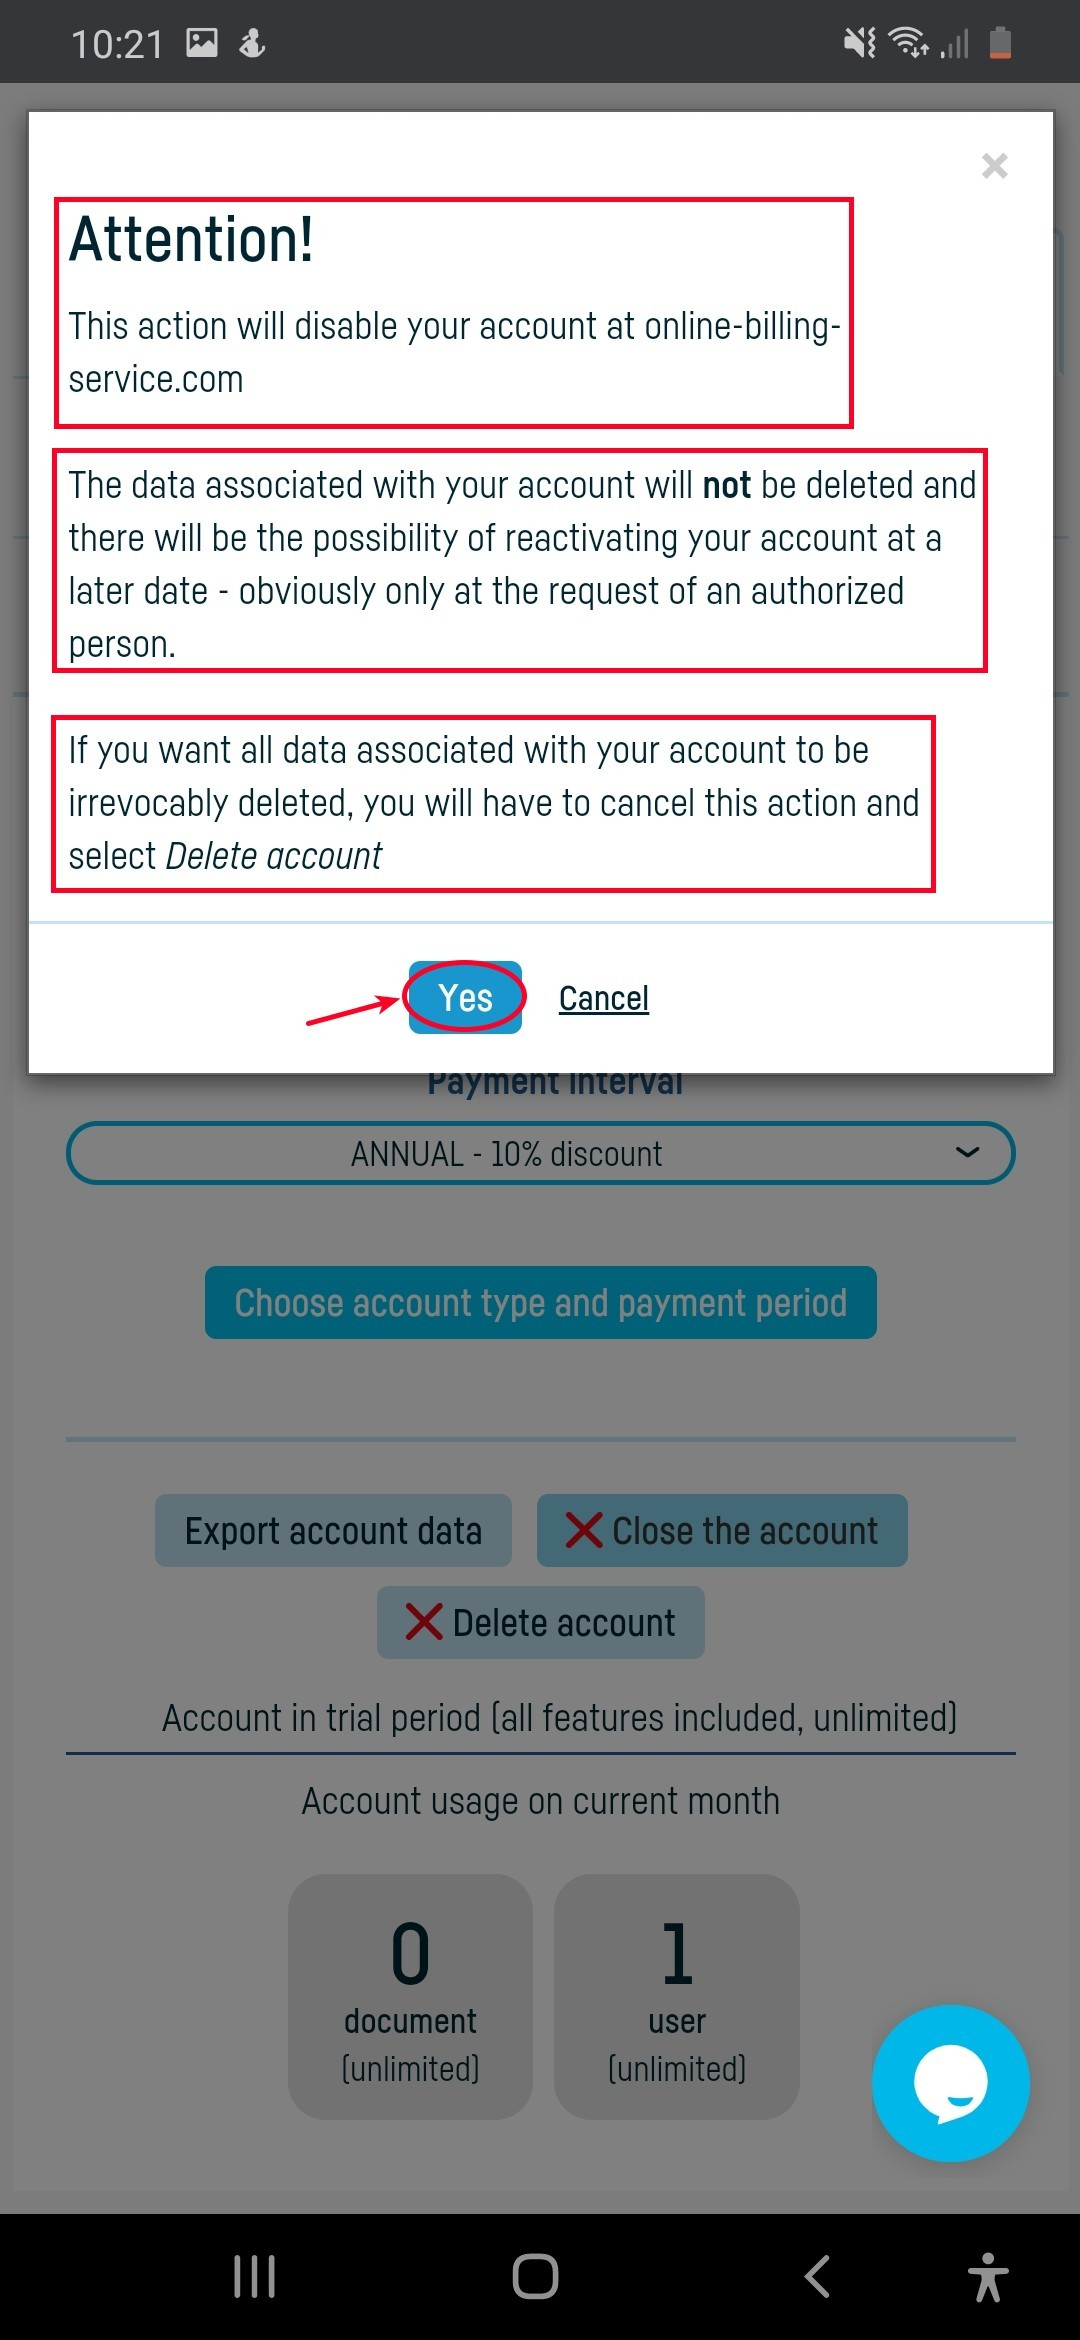 How do I close my account at online-billing-service? - step 3